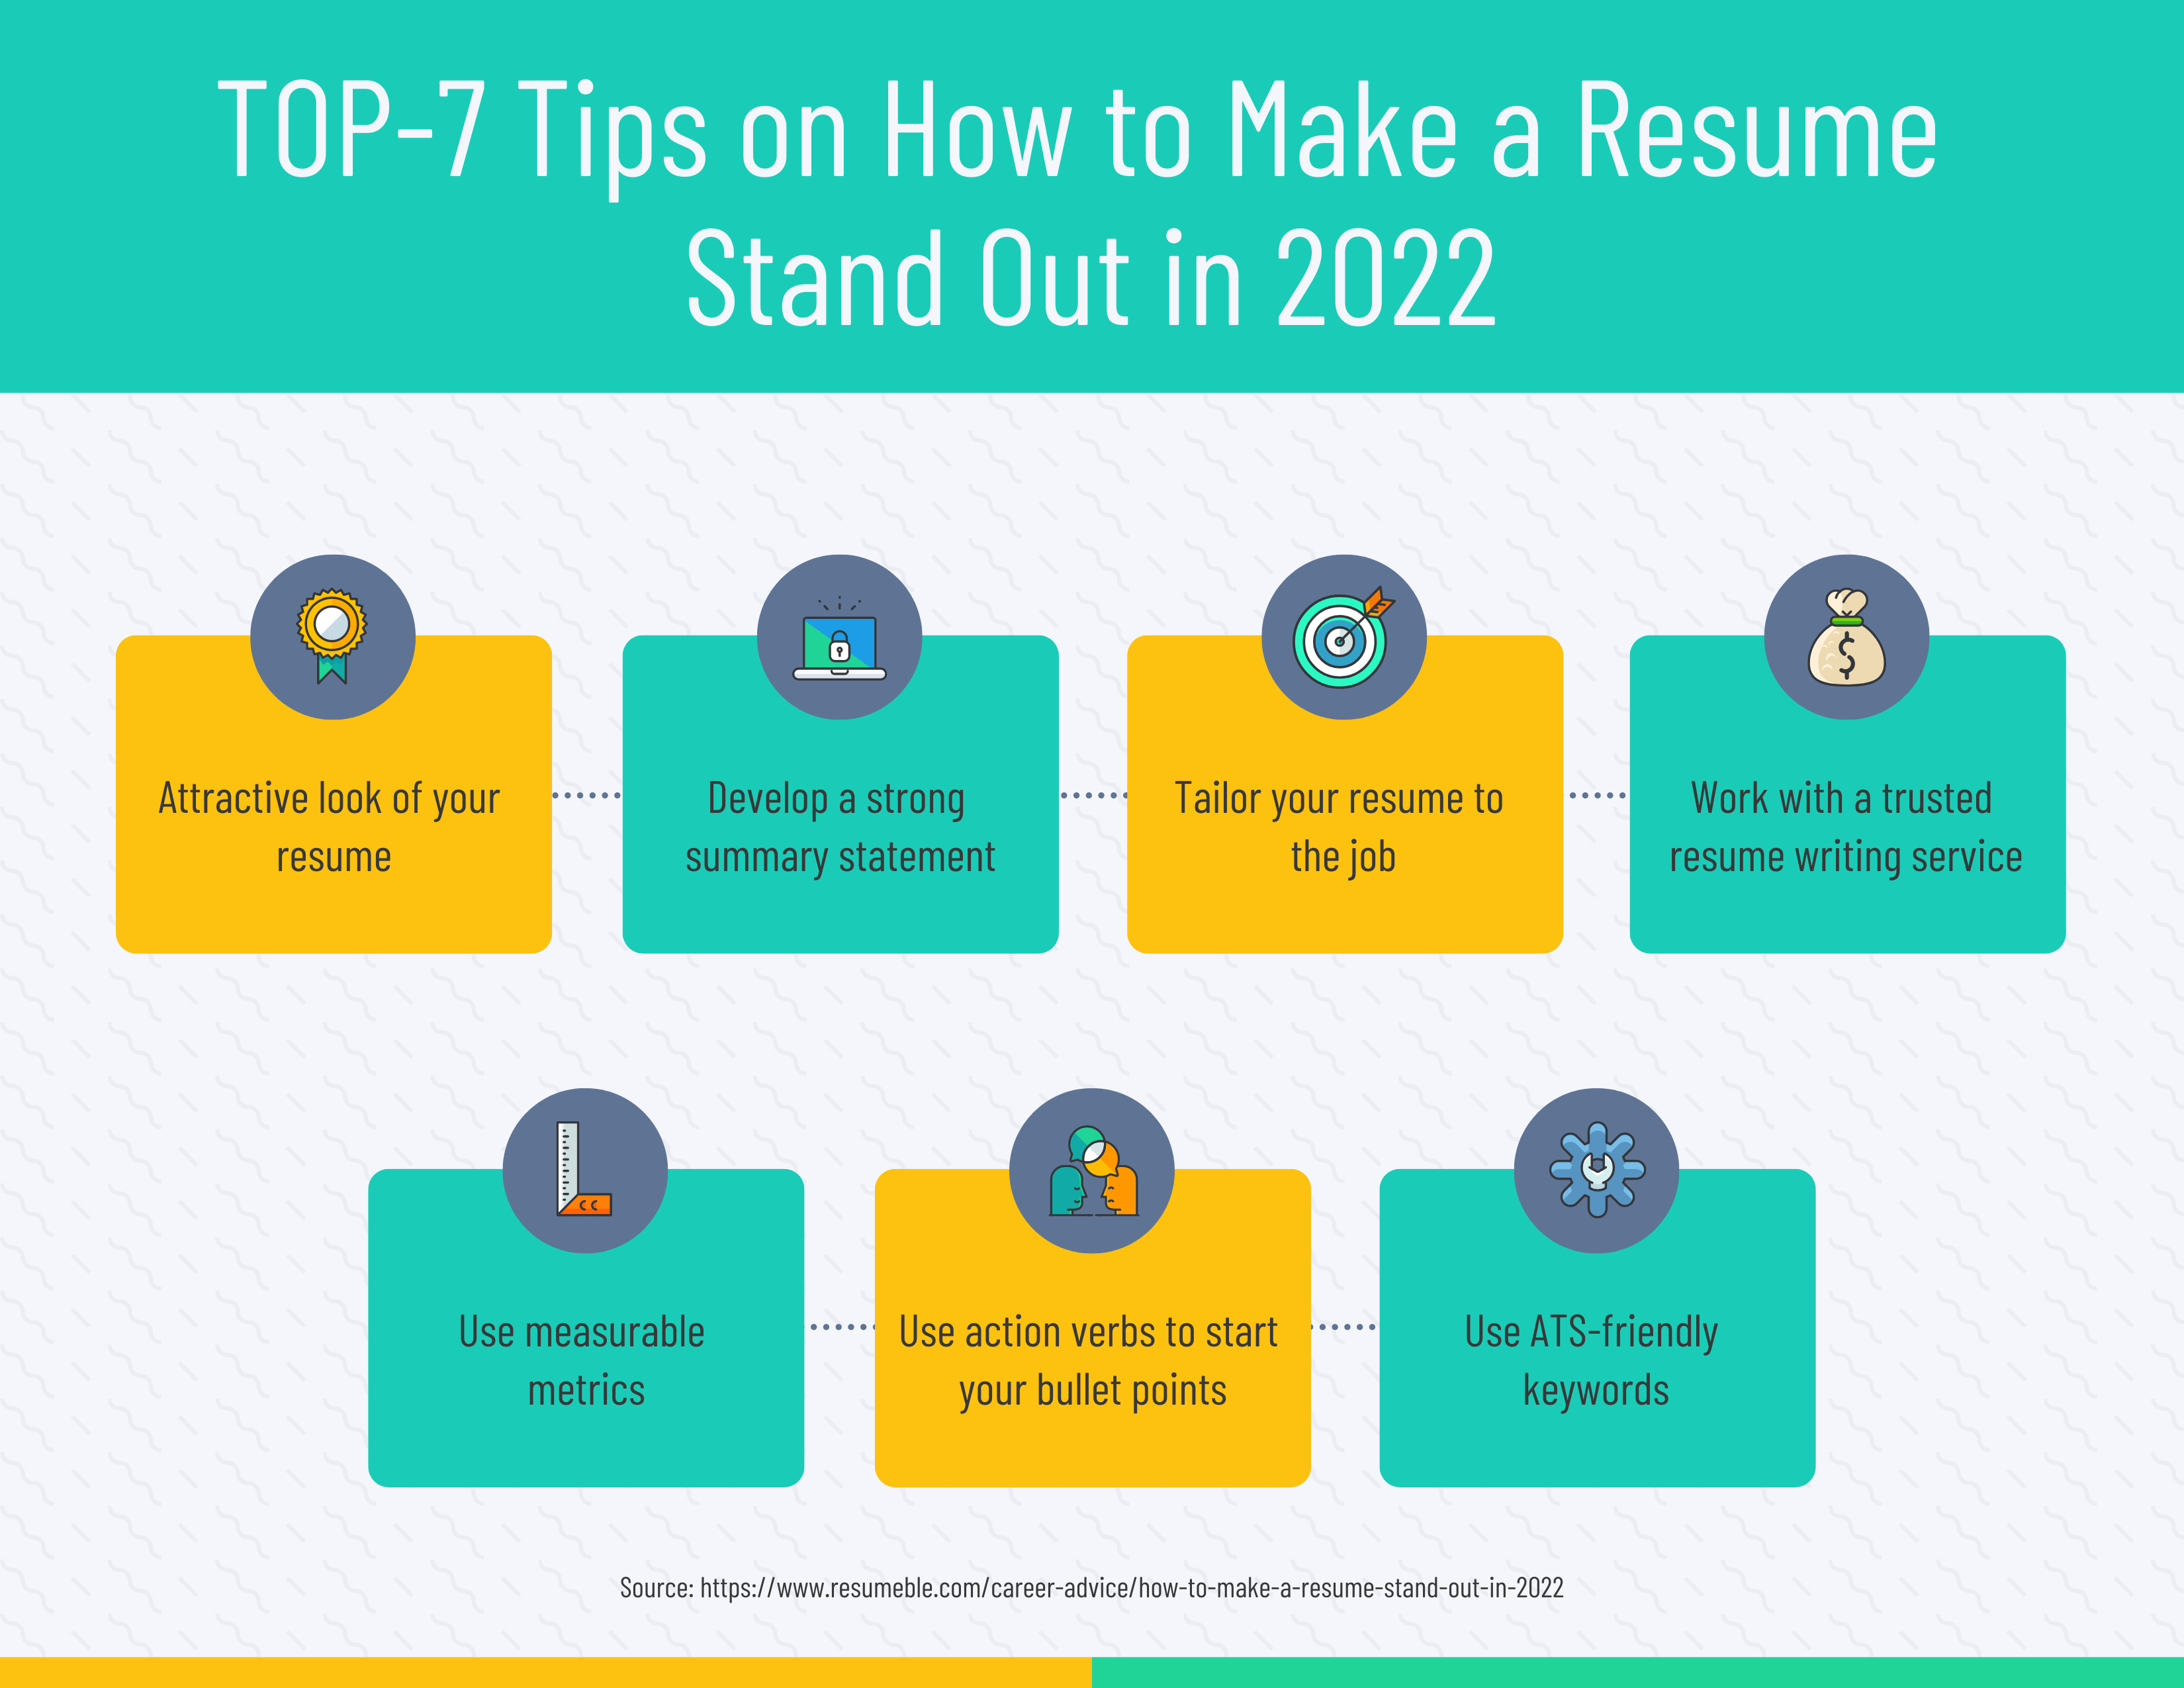 How to Make a Resume Stand Out in 2022